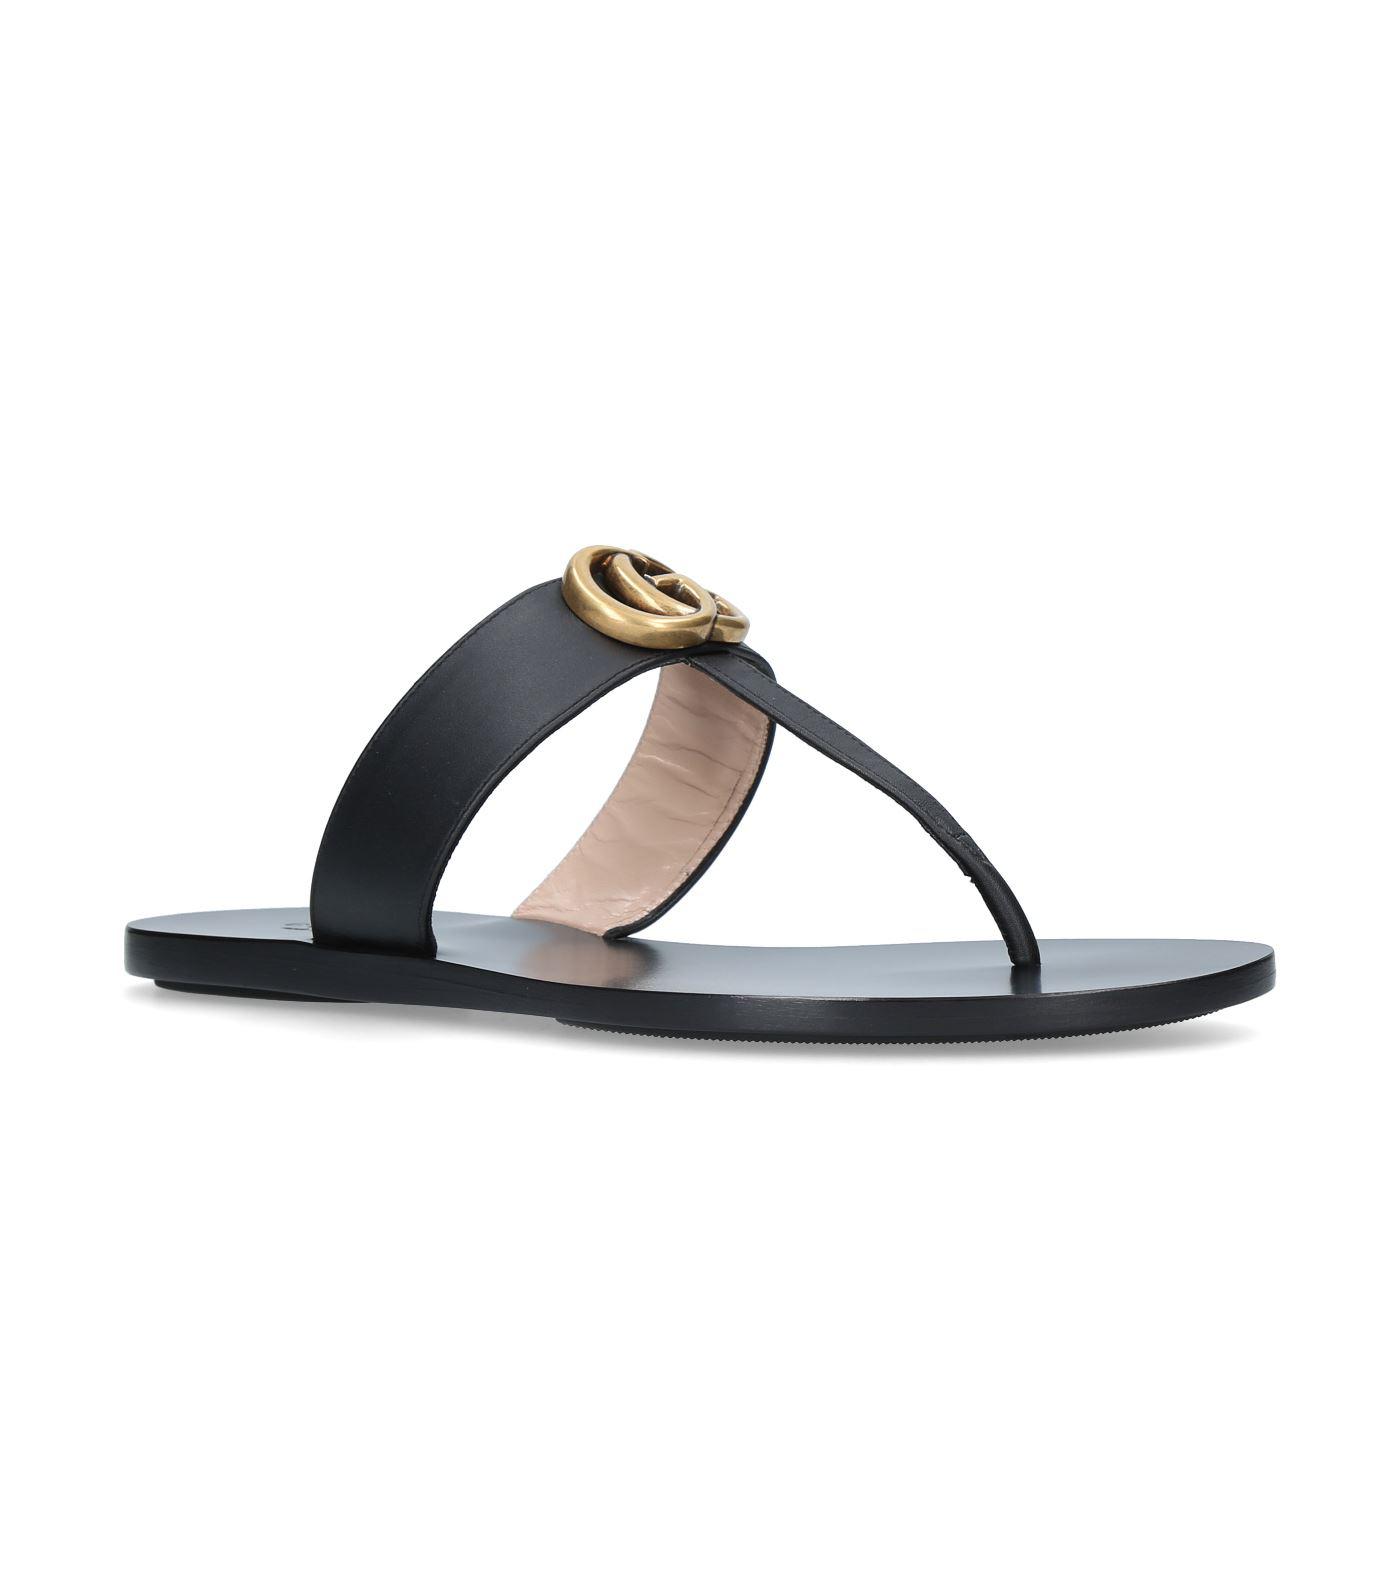  Gucci  Leather Marmont Sandals  in Black Save 11 Lyst